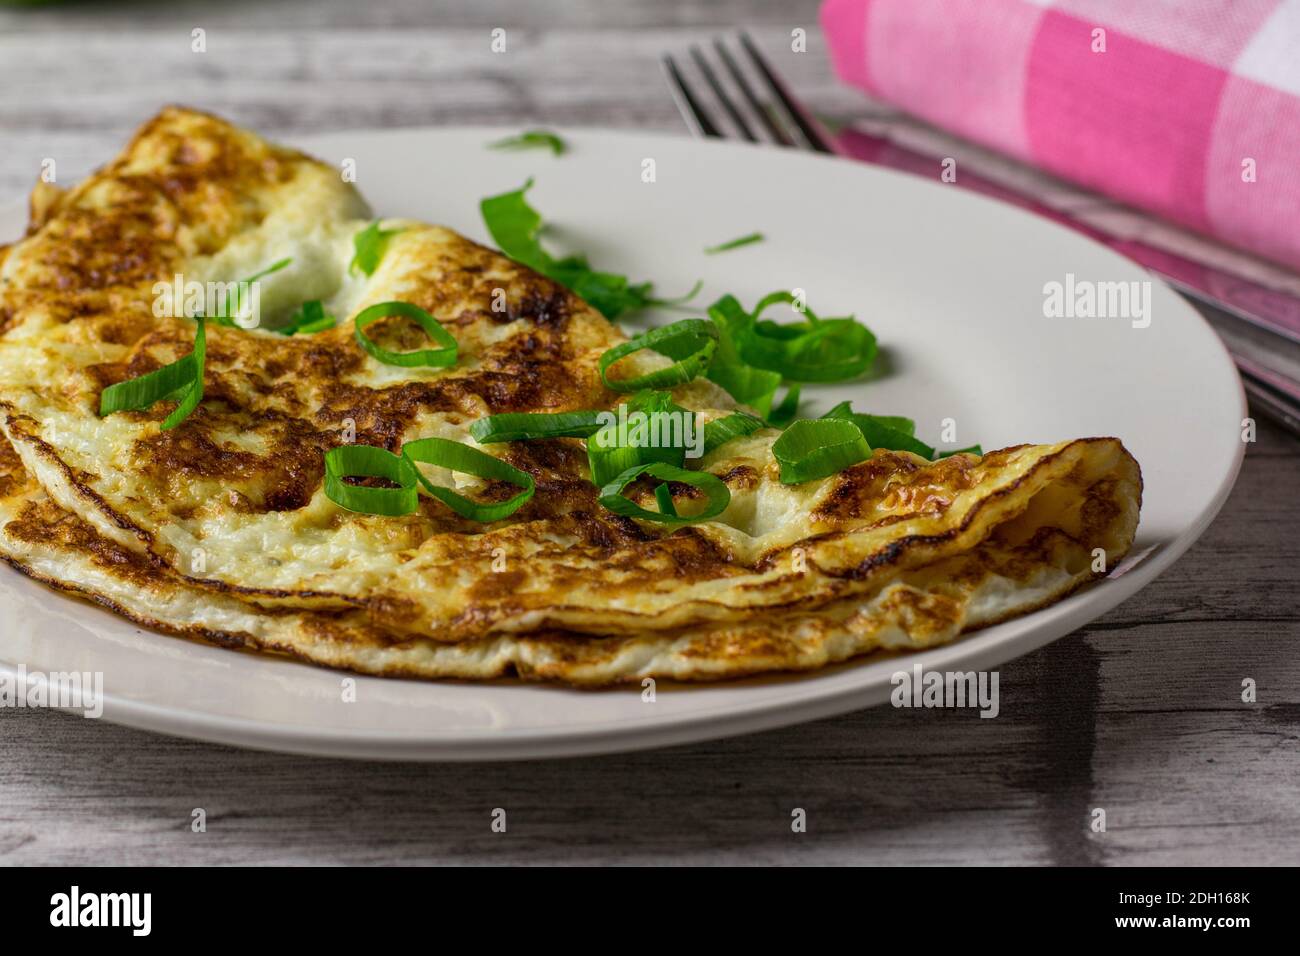 Egg white omelet with chives on a plate Stock Photo